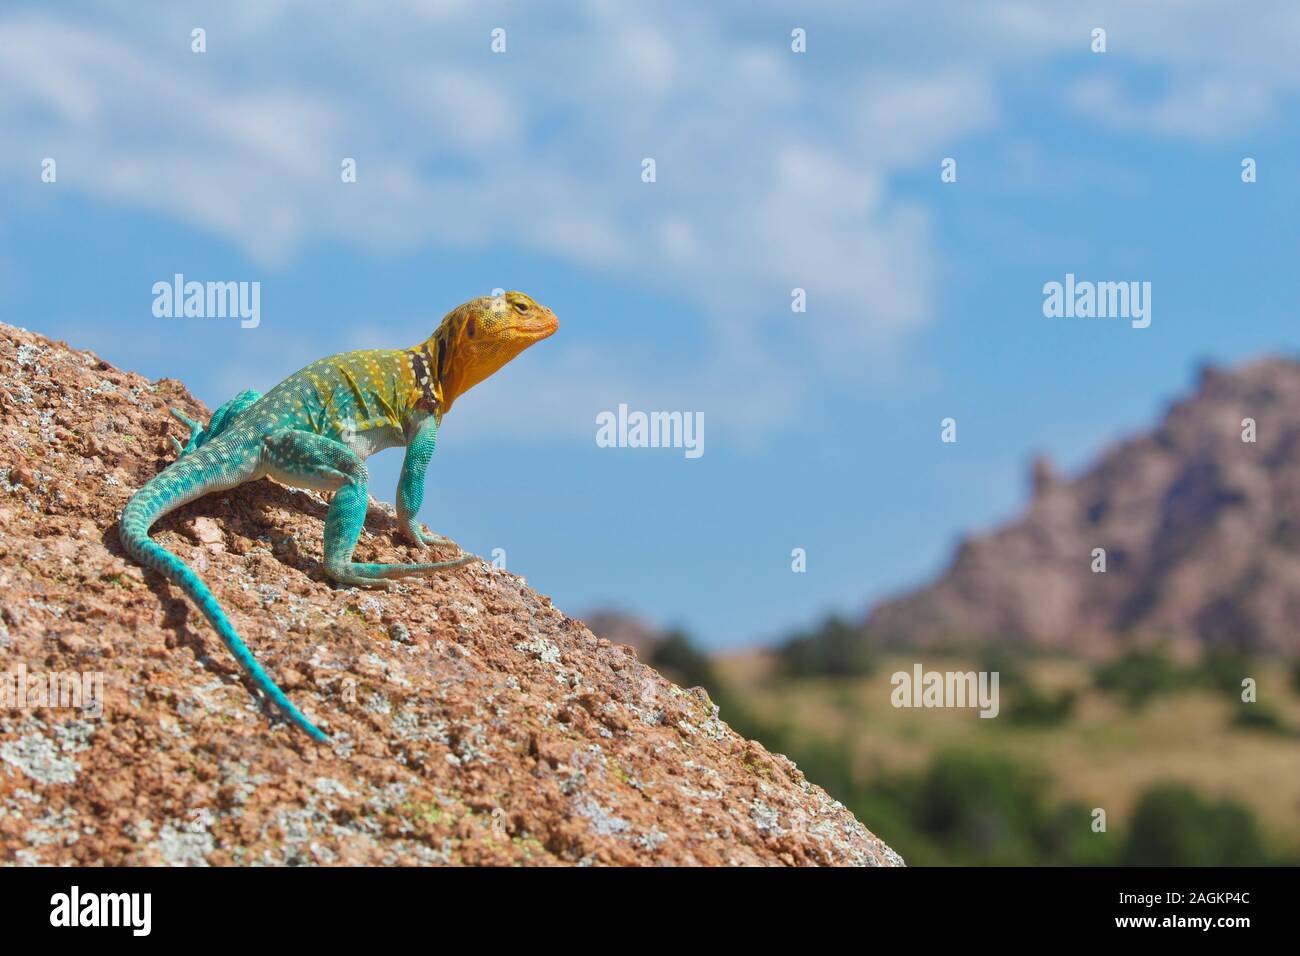 Environmental portrait of a male Eastern Collared Lizard, photographed in situ in the Wichita Mountains of Oklahoma. Stock Photo